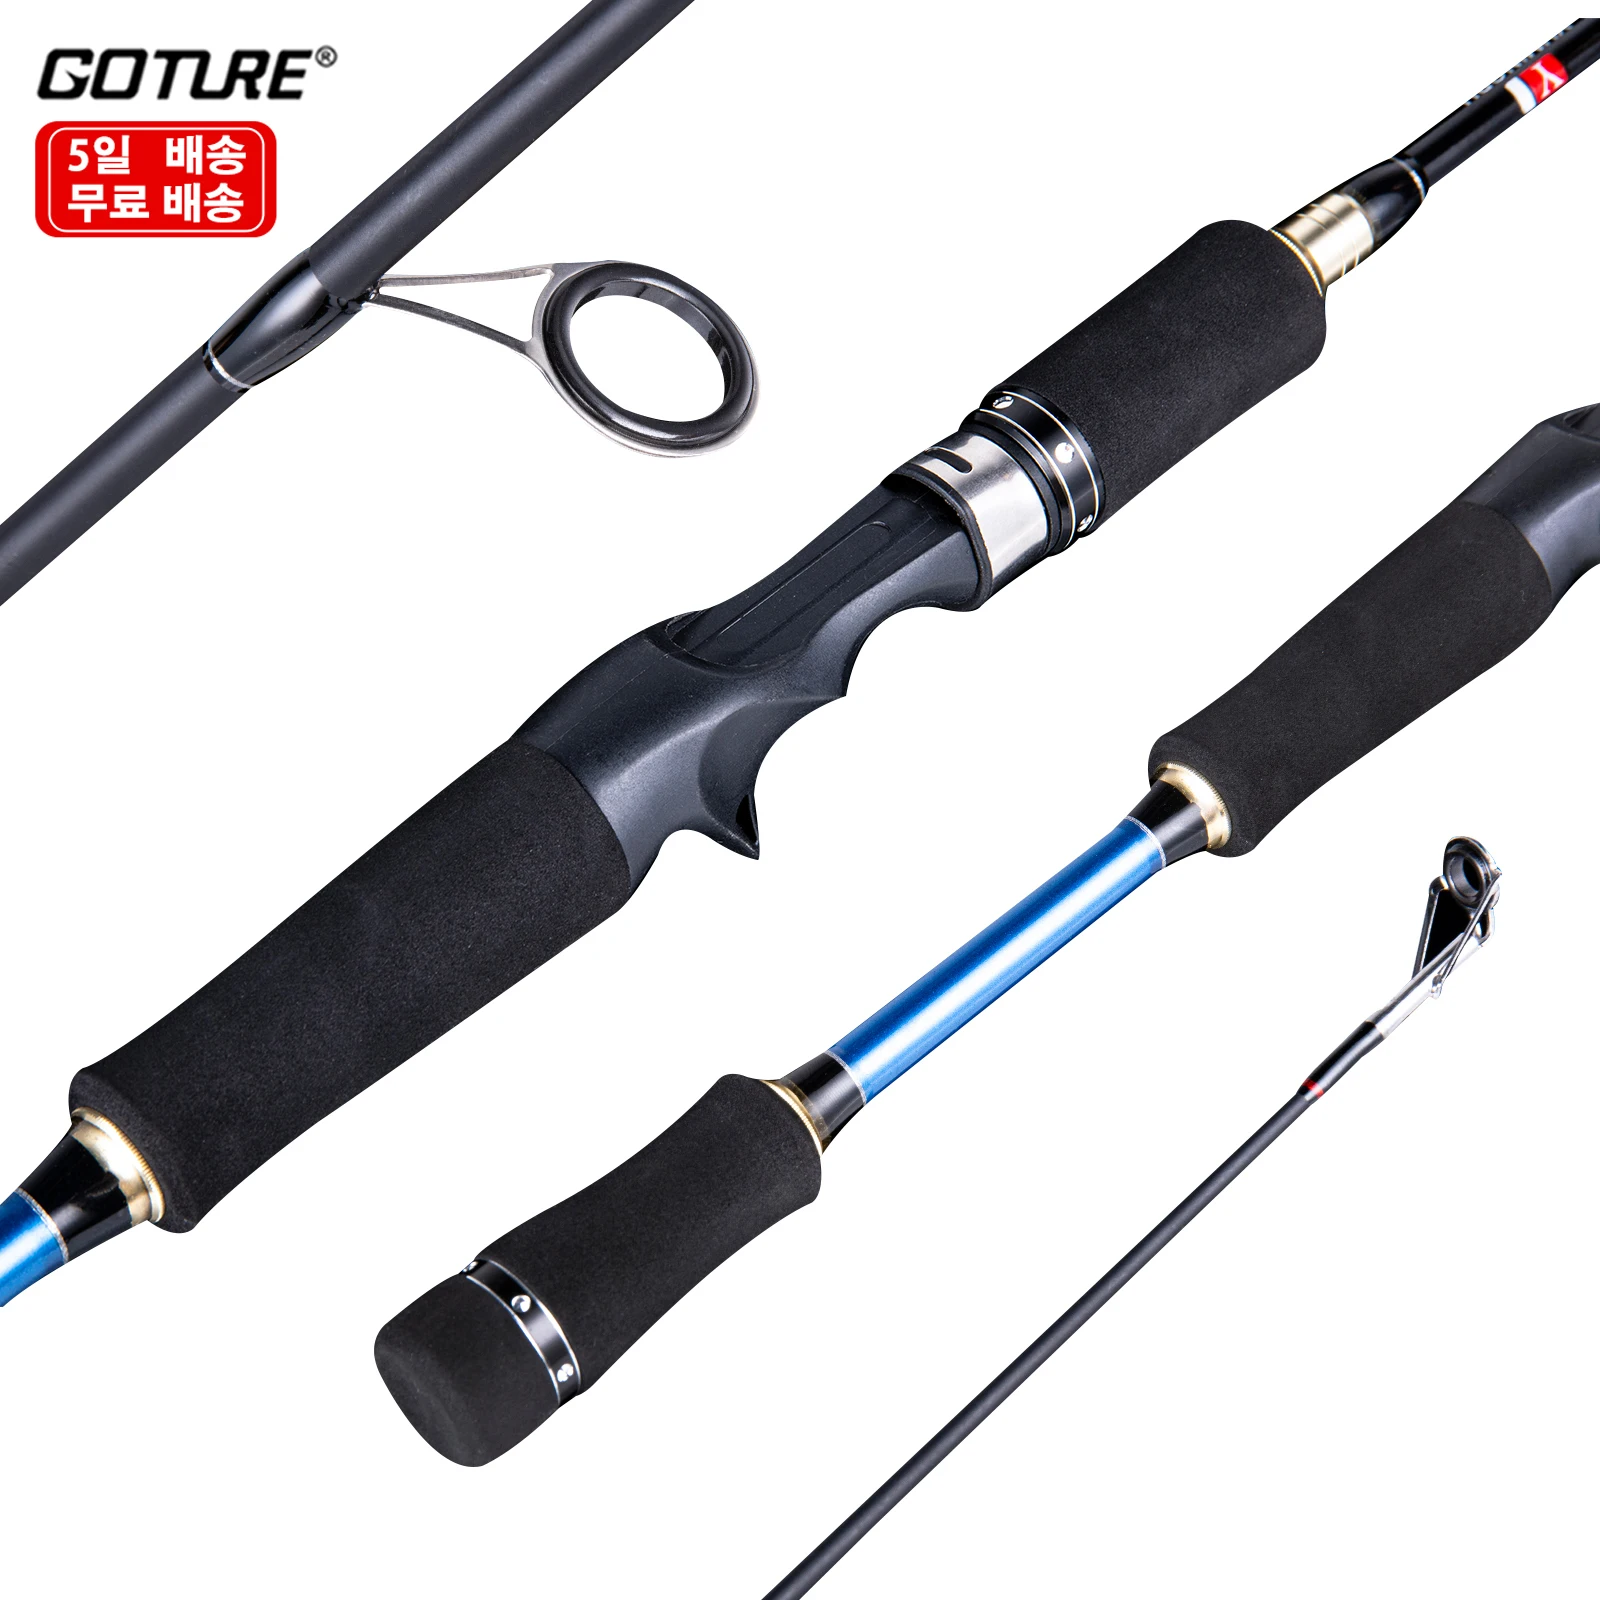 

Goture Spinning Casting Telescopic Fishing Rod Carbon Fiber 1.8m 2.1m 2.4m Lure Rod for Saltwater Freshwater M+ML Double Tips